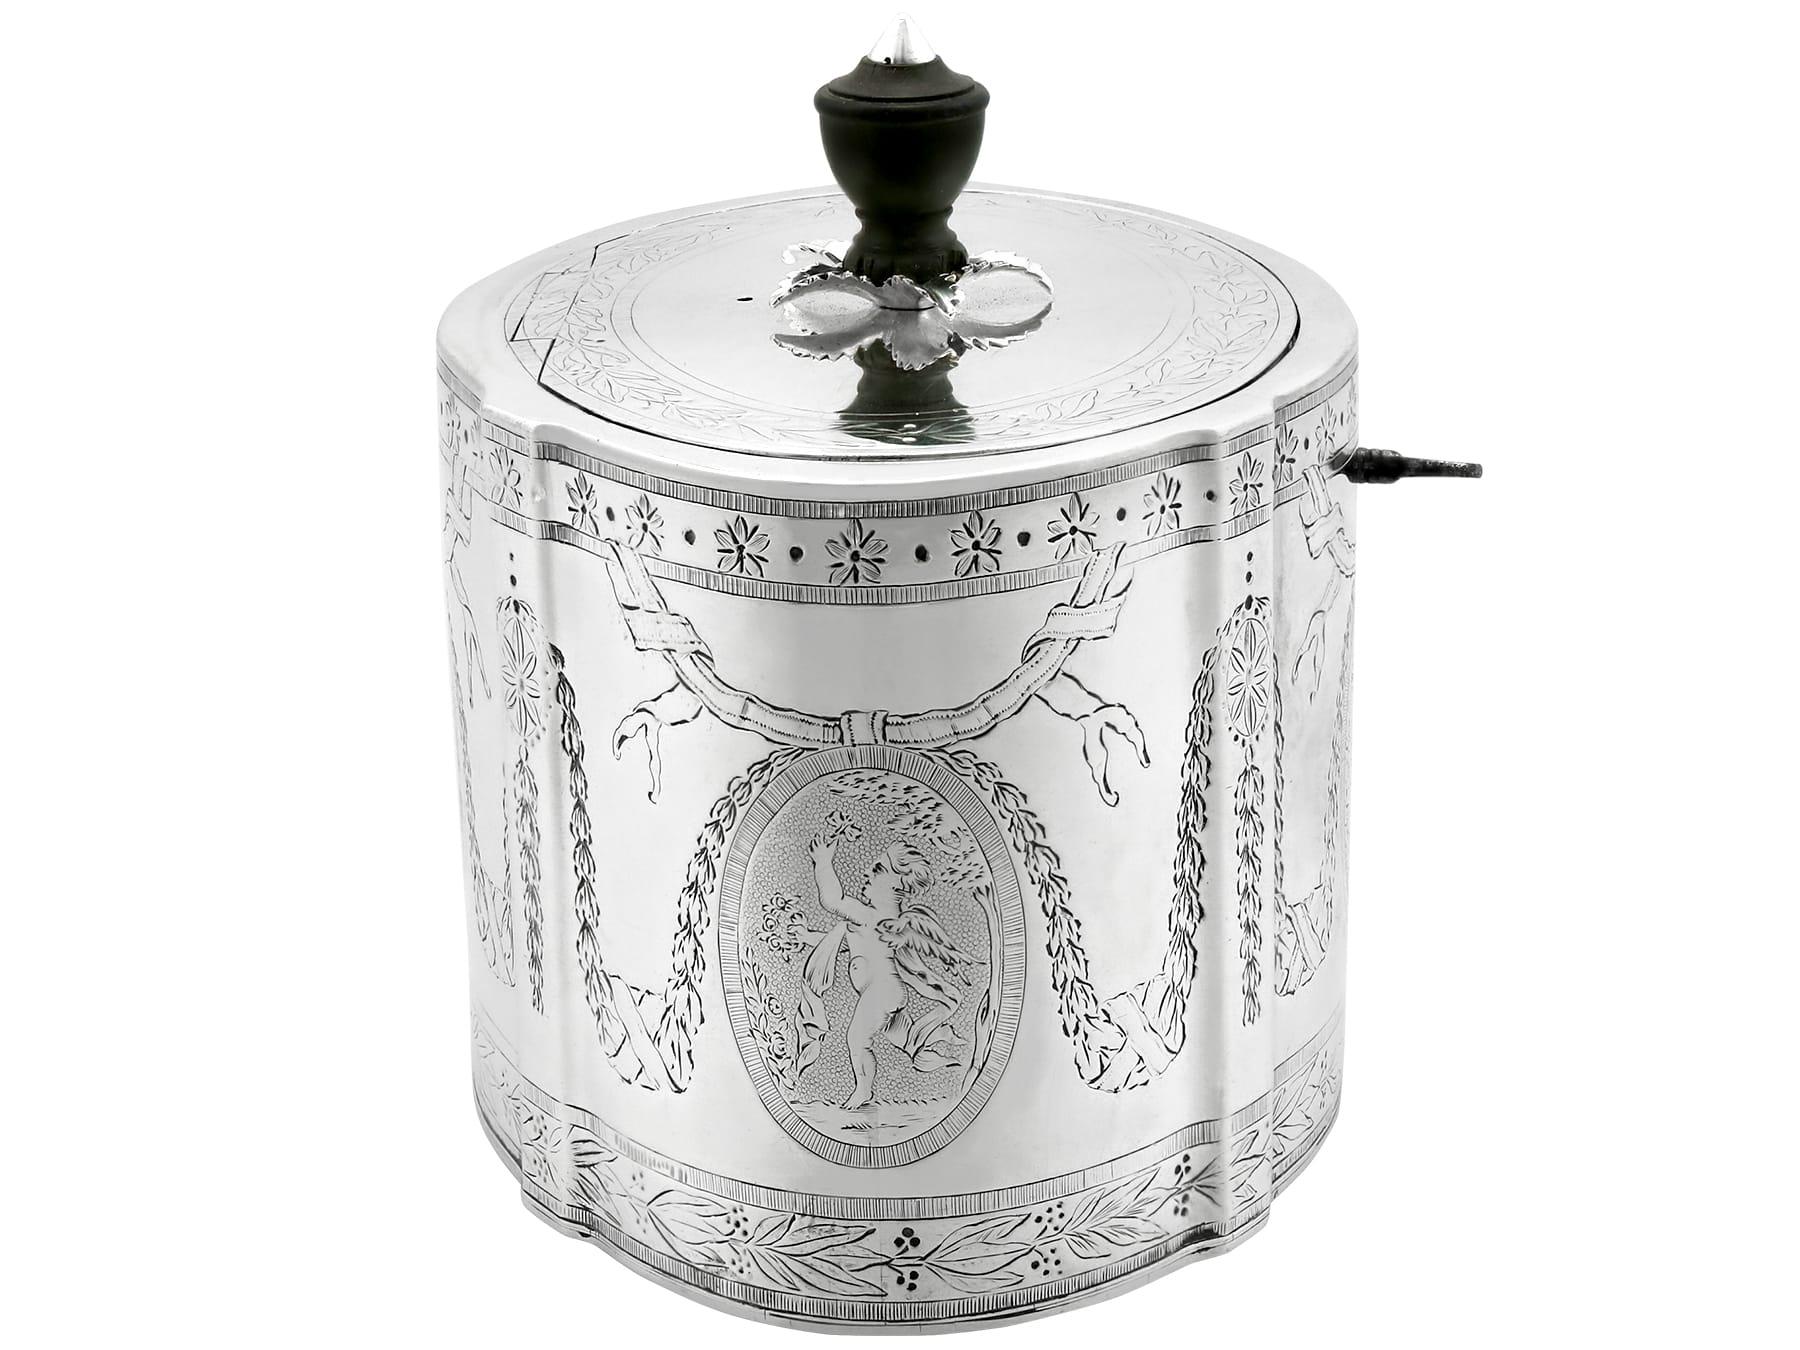 Late 18th Century Antique George III Sterling Silver Locking Tea Caddy (1783)